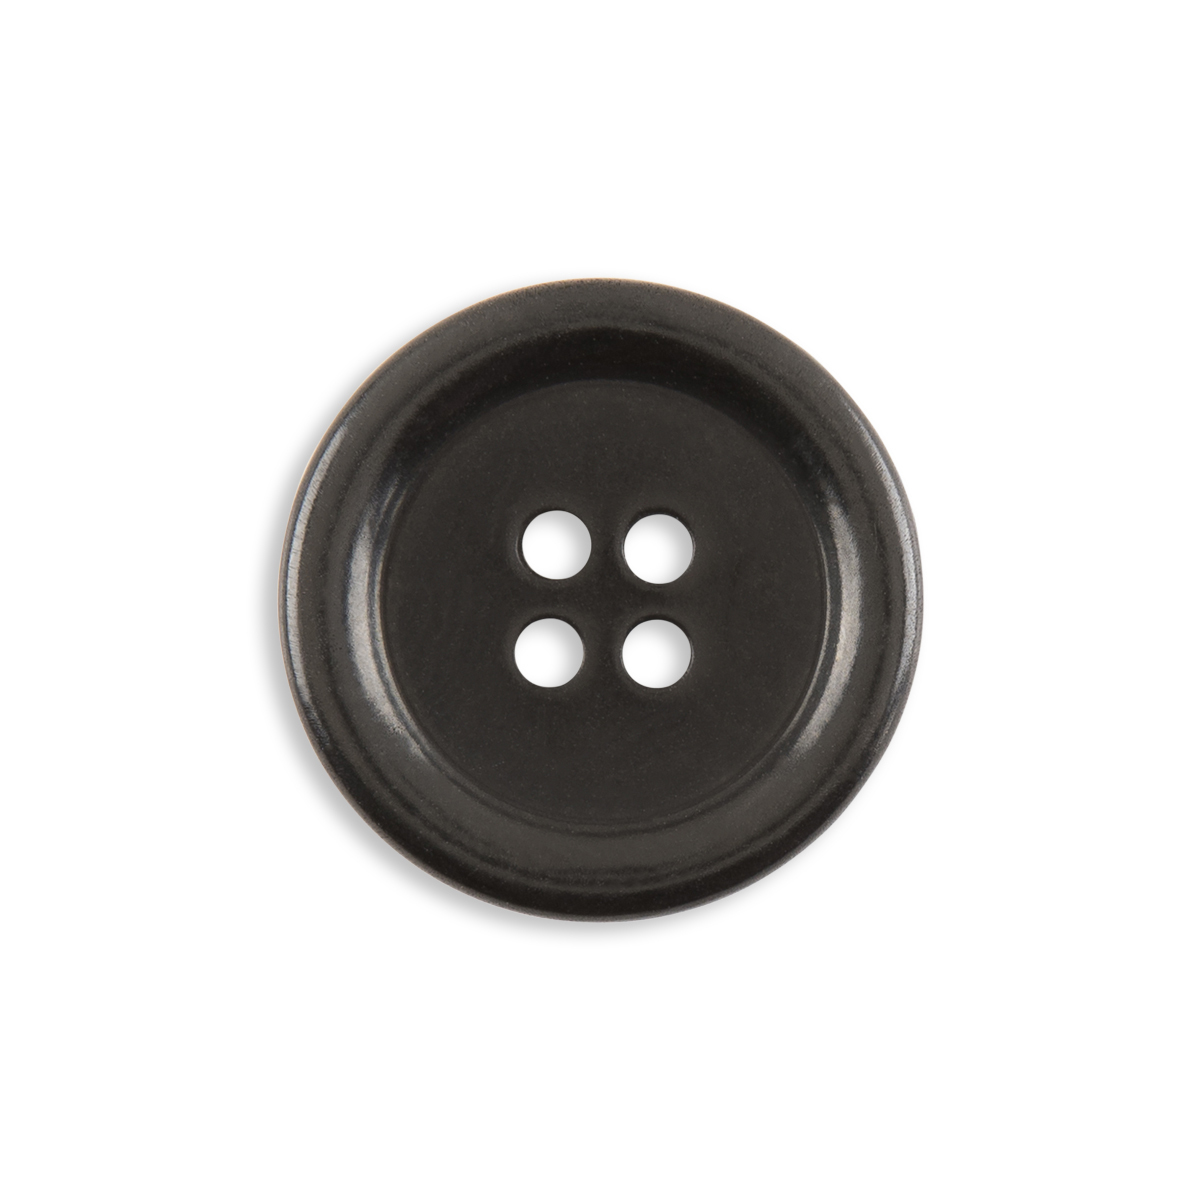 Shirt Buttons, Button Fasteners, Button Covers For Dress Shirts